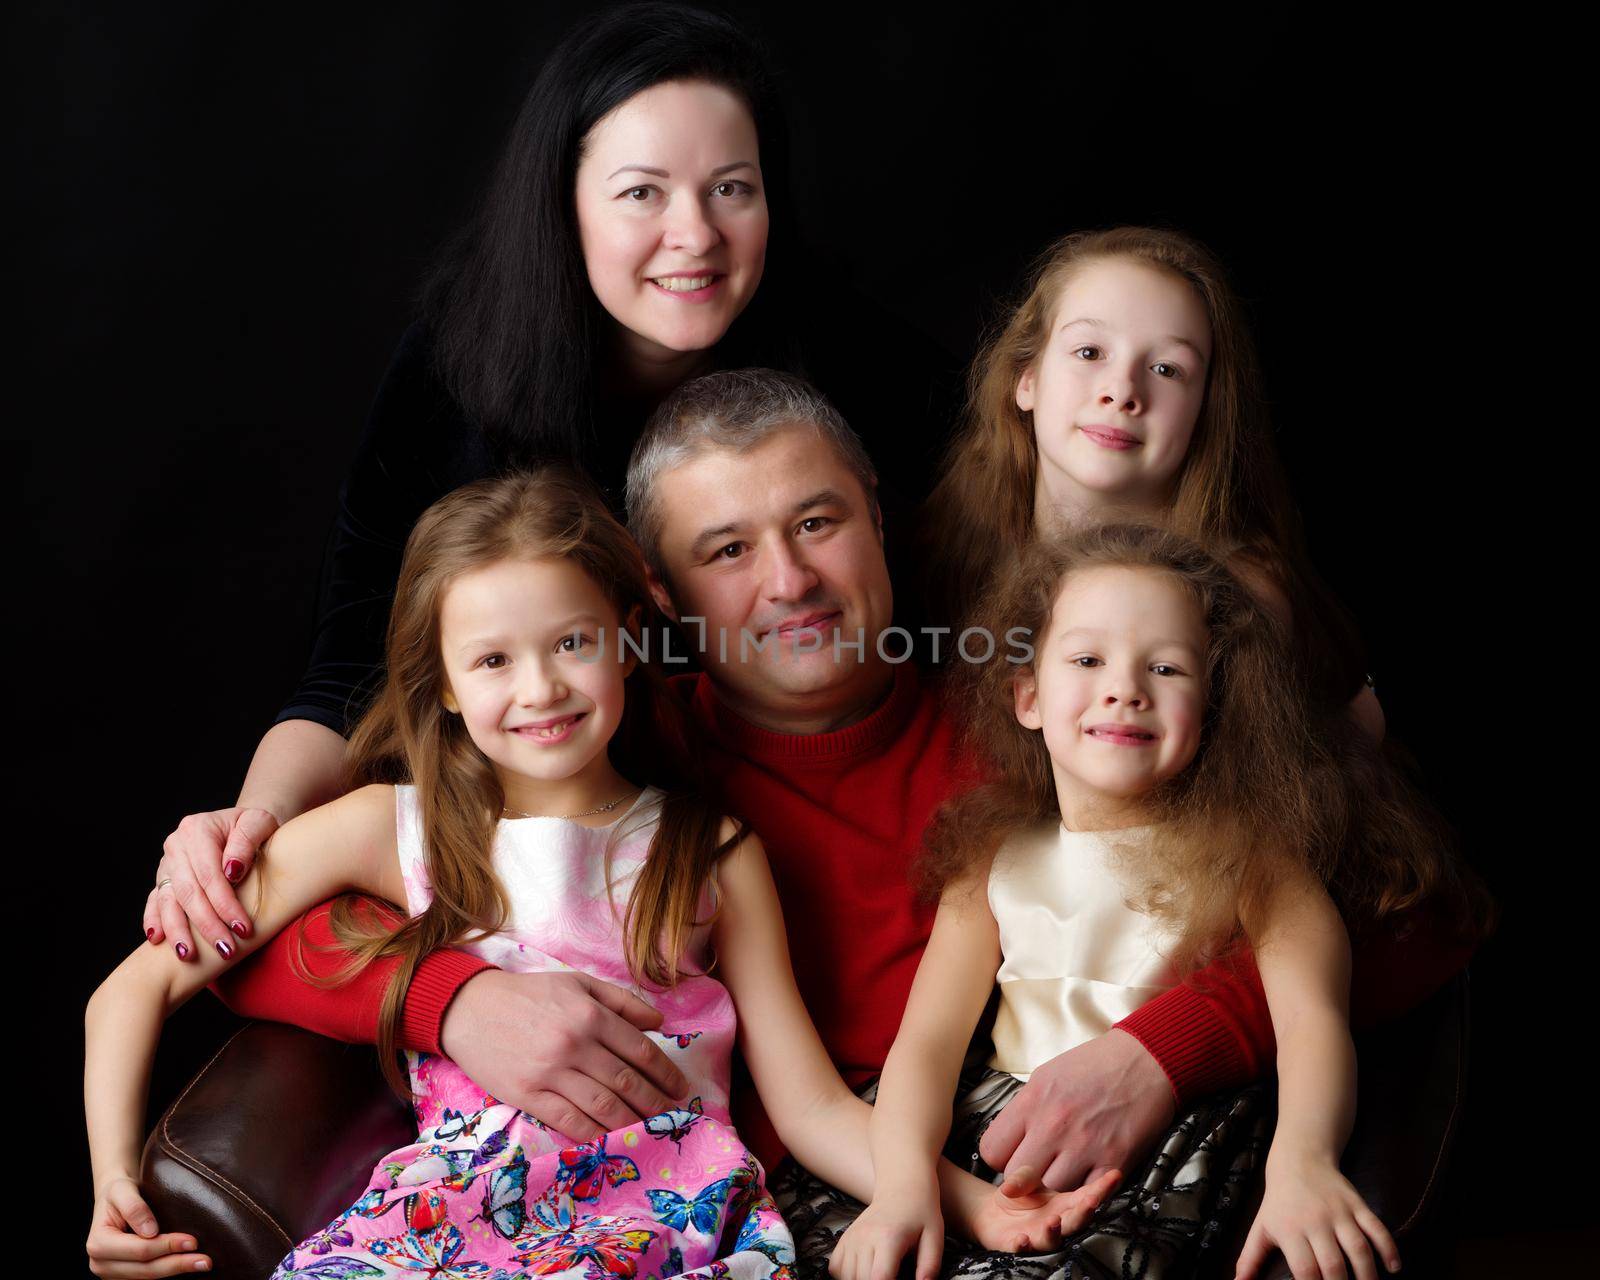 Big happy family with children on a black background. Concepts people, holidays, happiness, harmonious development of the child in the family.